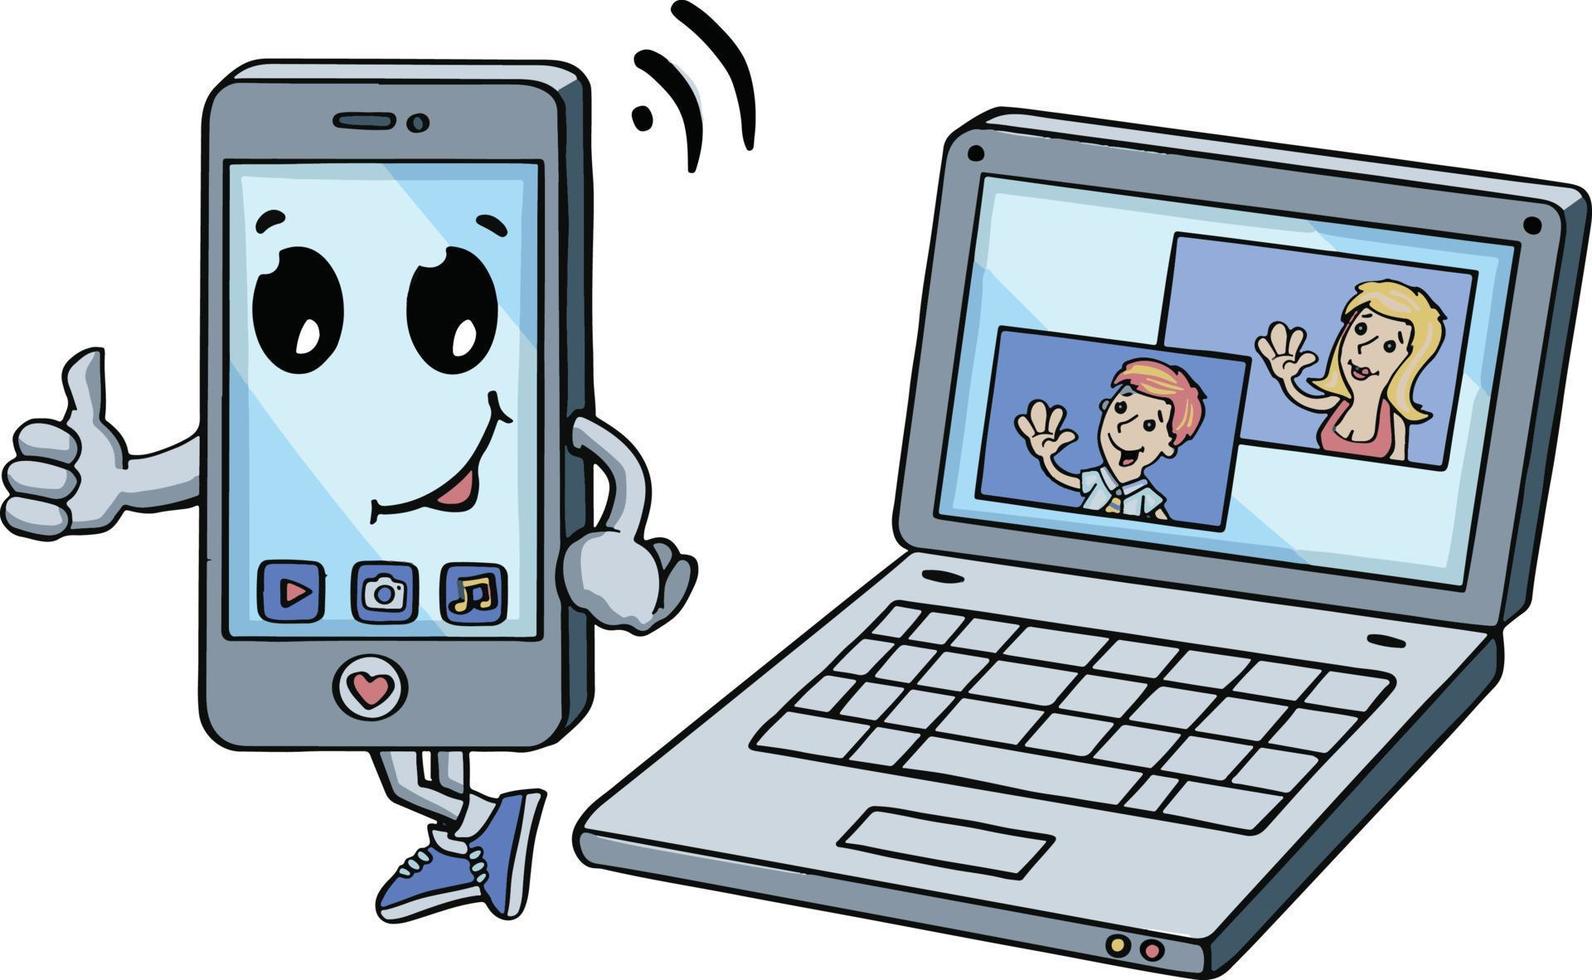 Video conferencing by phone and computer hand drawn icon vector